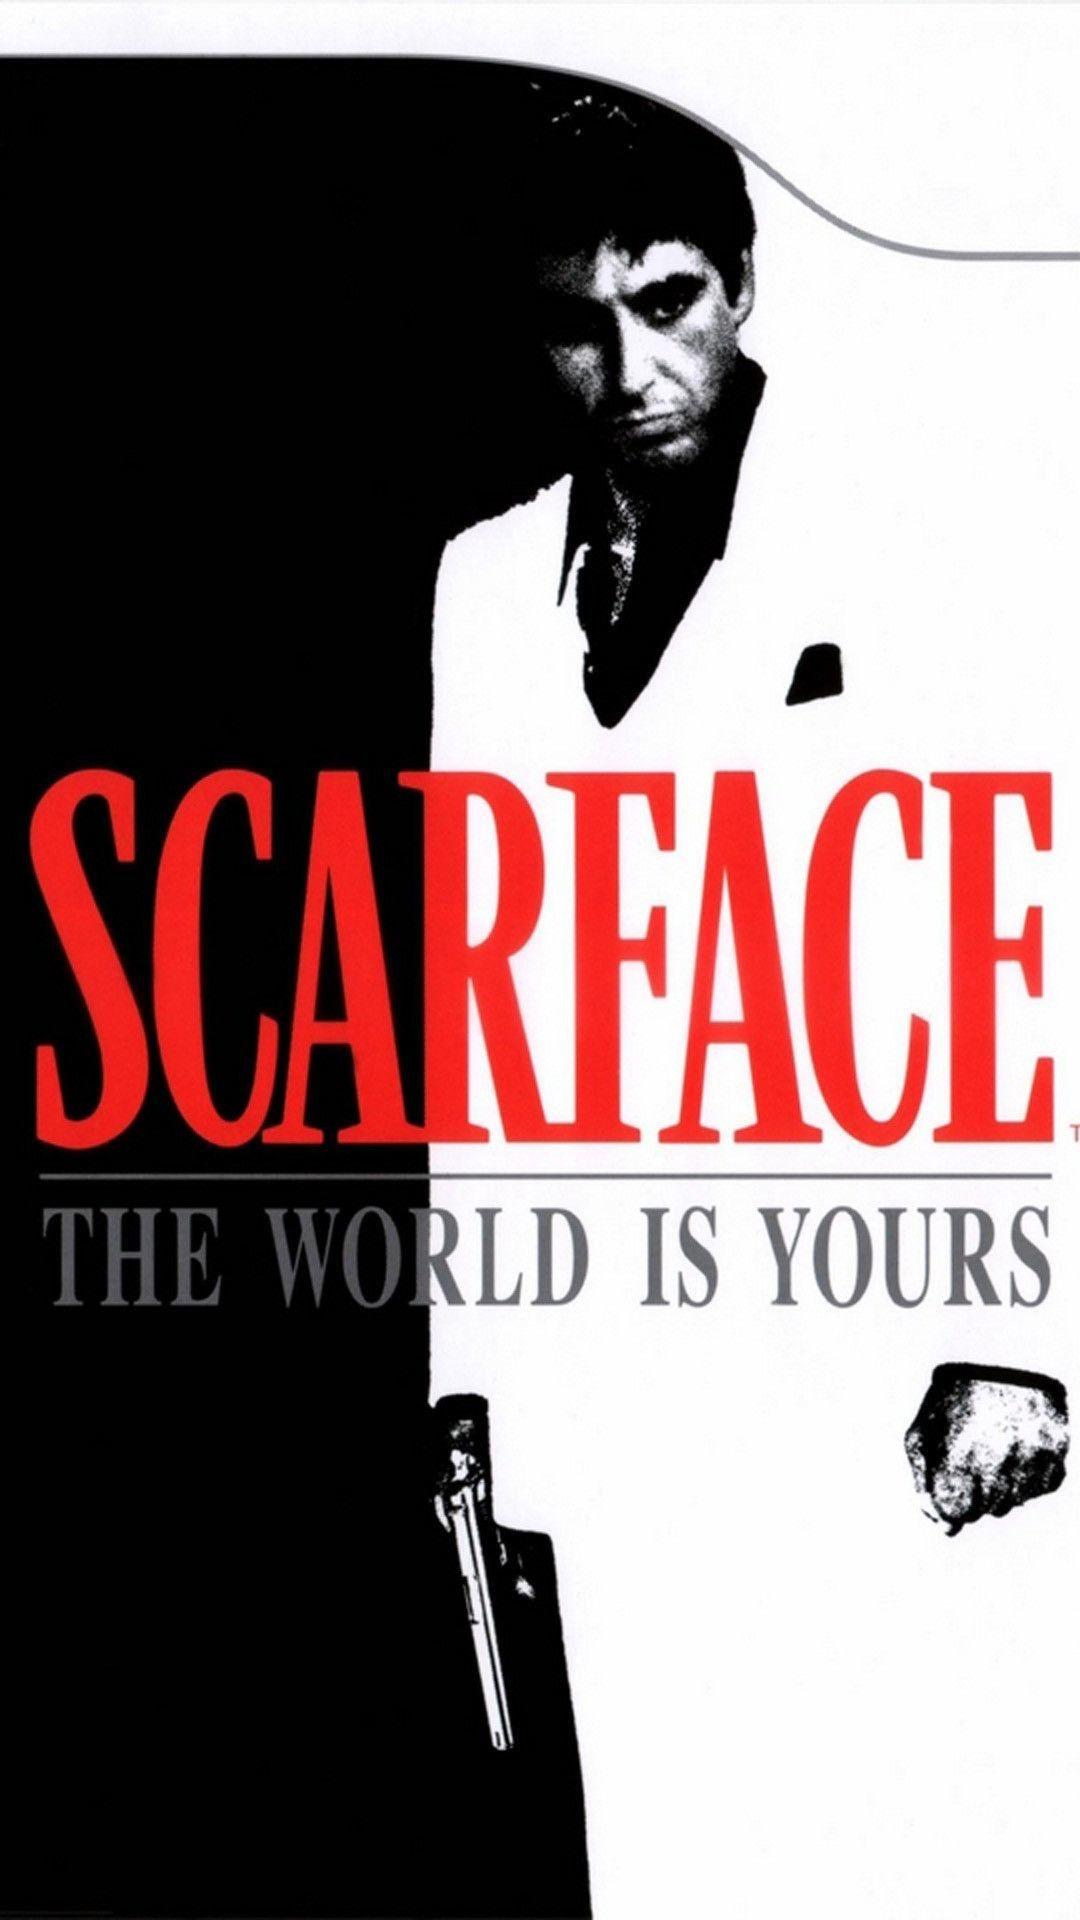 Scarface Quotes Wallpapers - Top Free Scarface Quotes Backgrounds